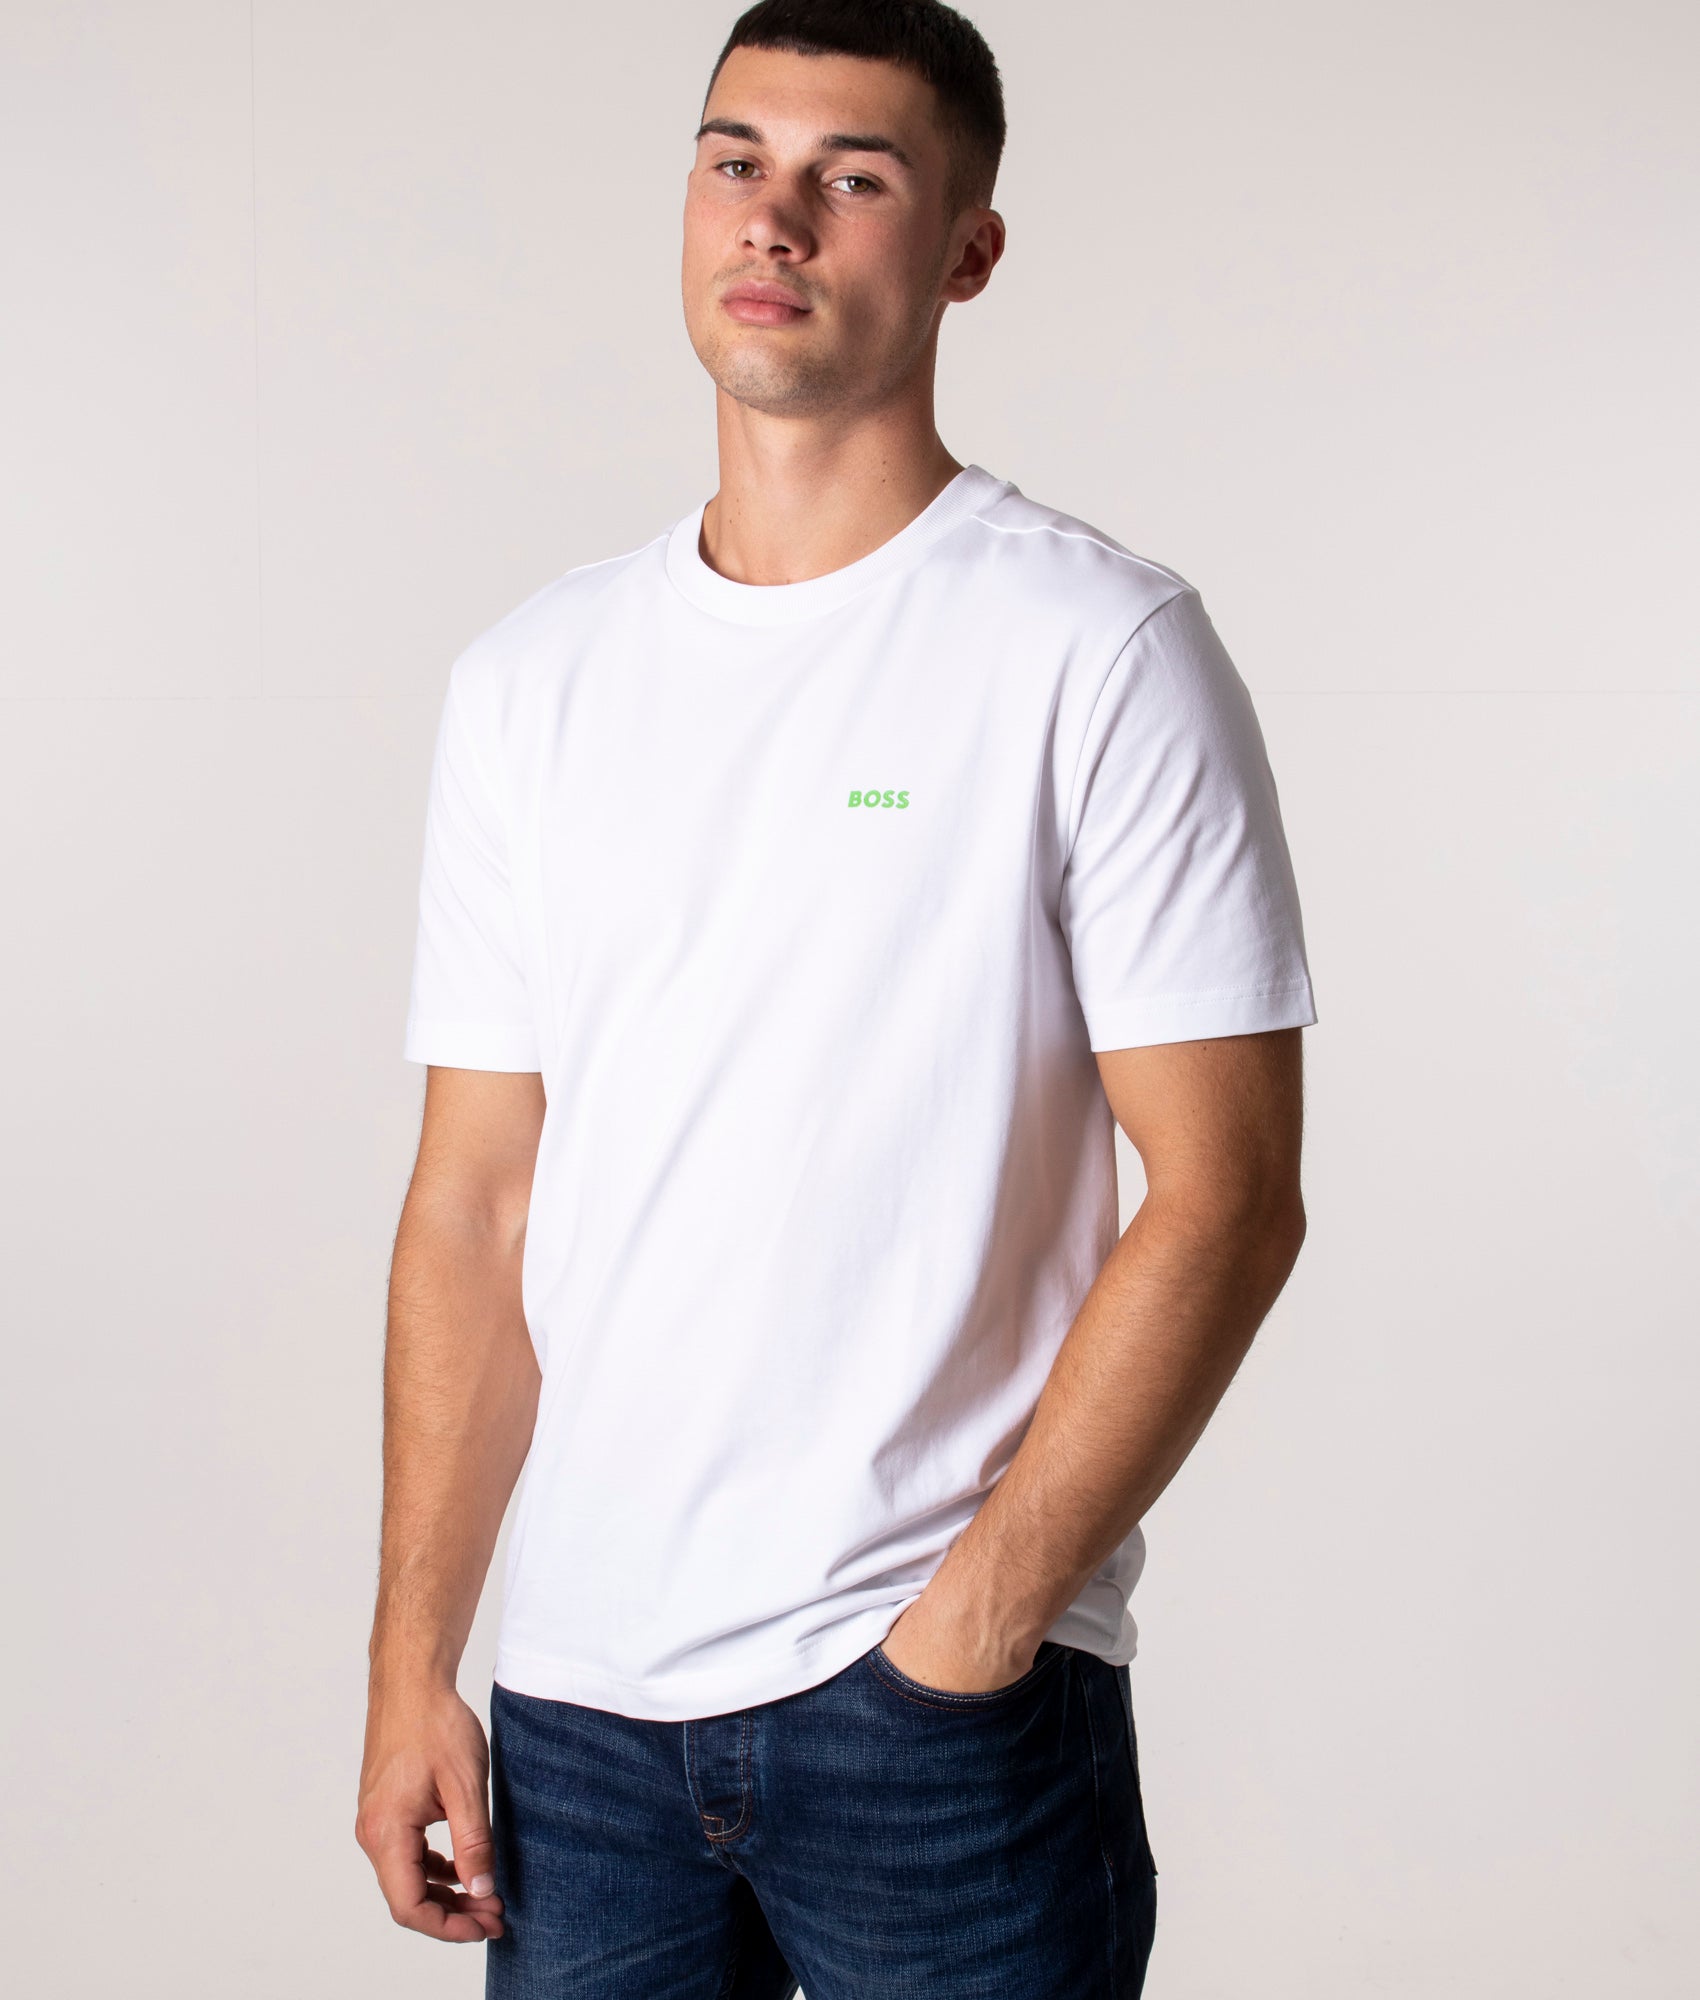 BOSS Mens Relaxed Fit Stretch T-Shirt - Colour: 100 White - Size: Medium